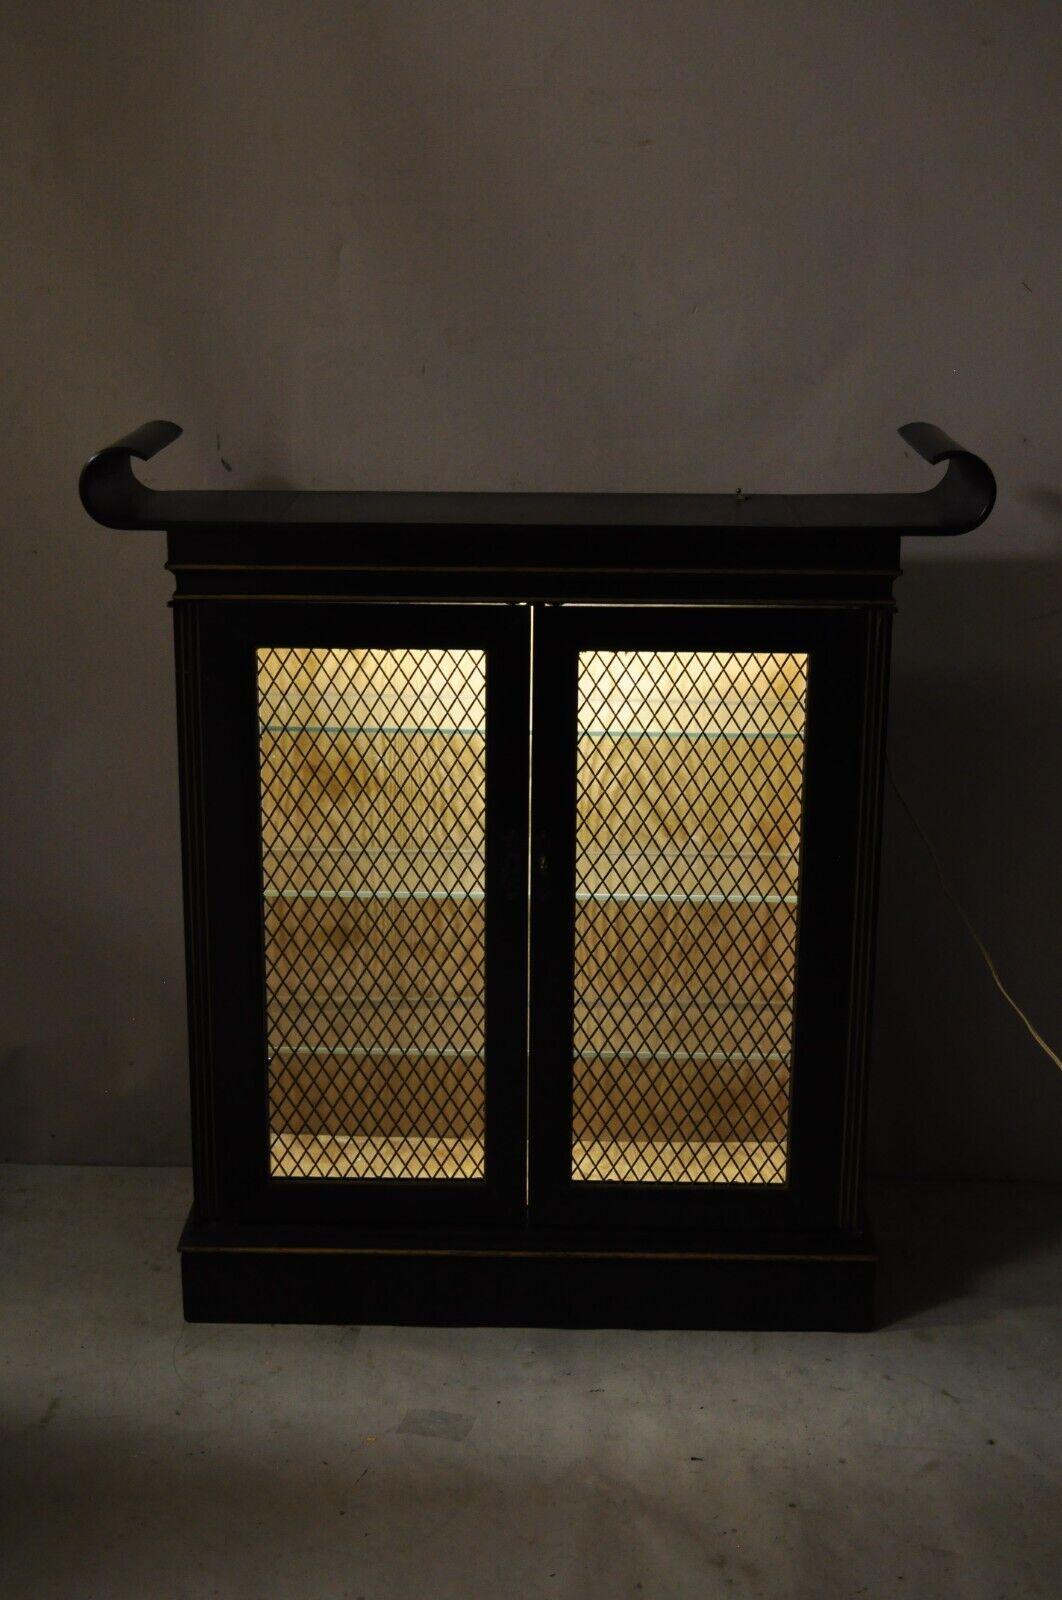 Vintage Chinoiserie ebonized black lacquer lighted pagoda display cabinet Curio. Item features a nice small size, black lacquer finish, bentwood 